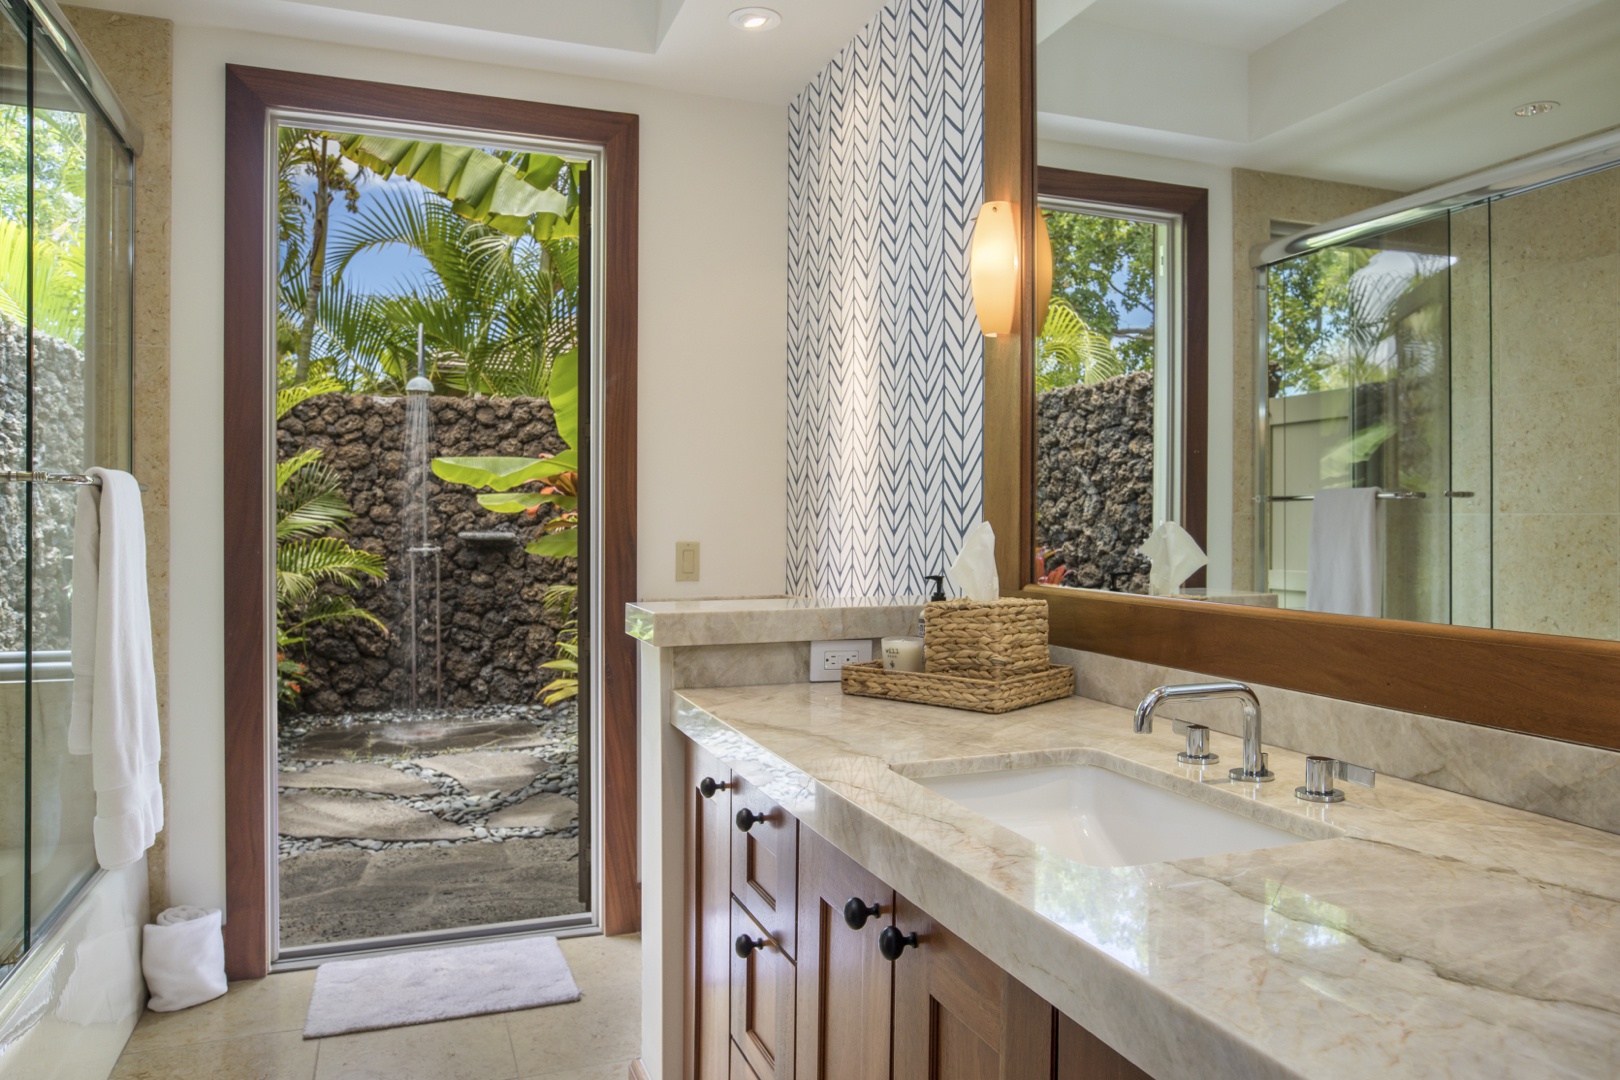 Kailua Kona Vacation Rentals, 4BD Kahikole Street (218) Estate Home at Four Seasons Resort at Hualalai - En suite bath with shower/tub combo & private outdoor garden shower